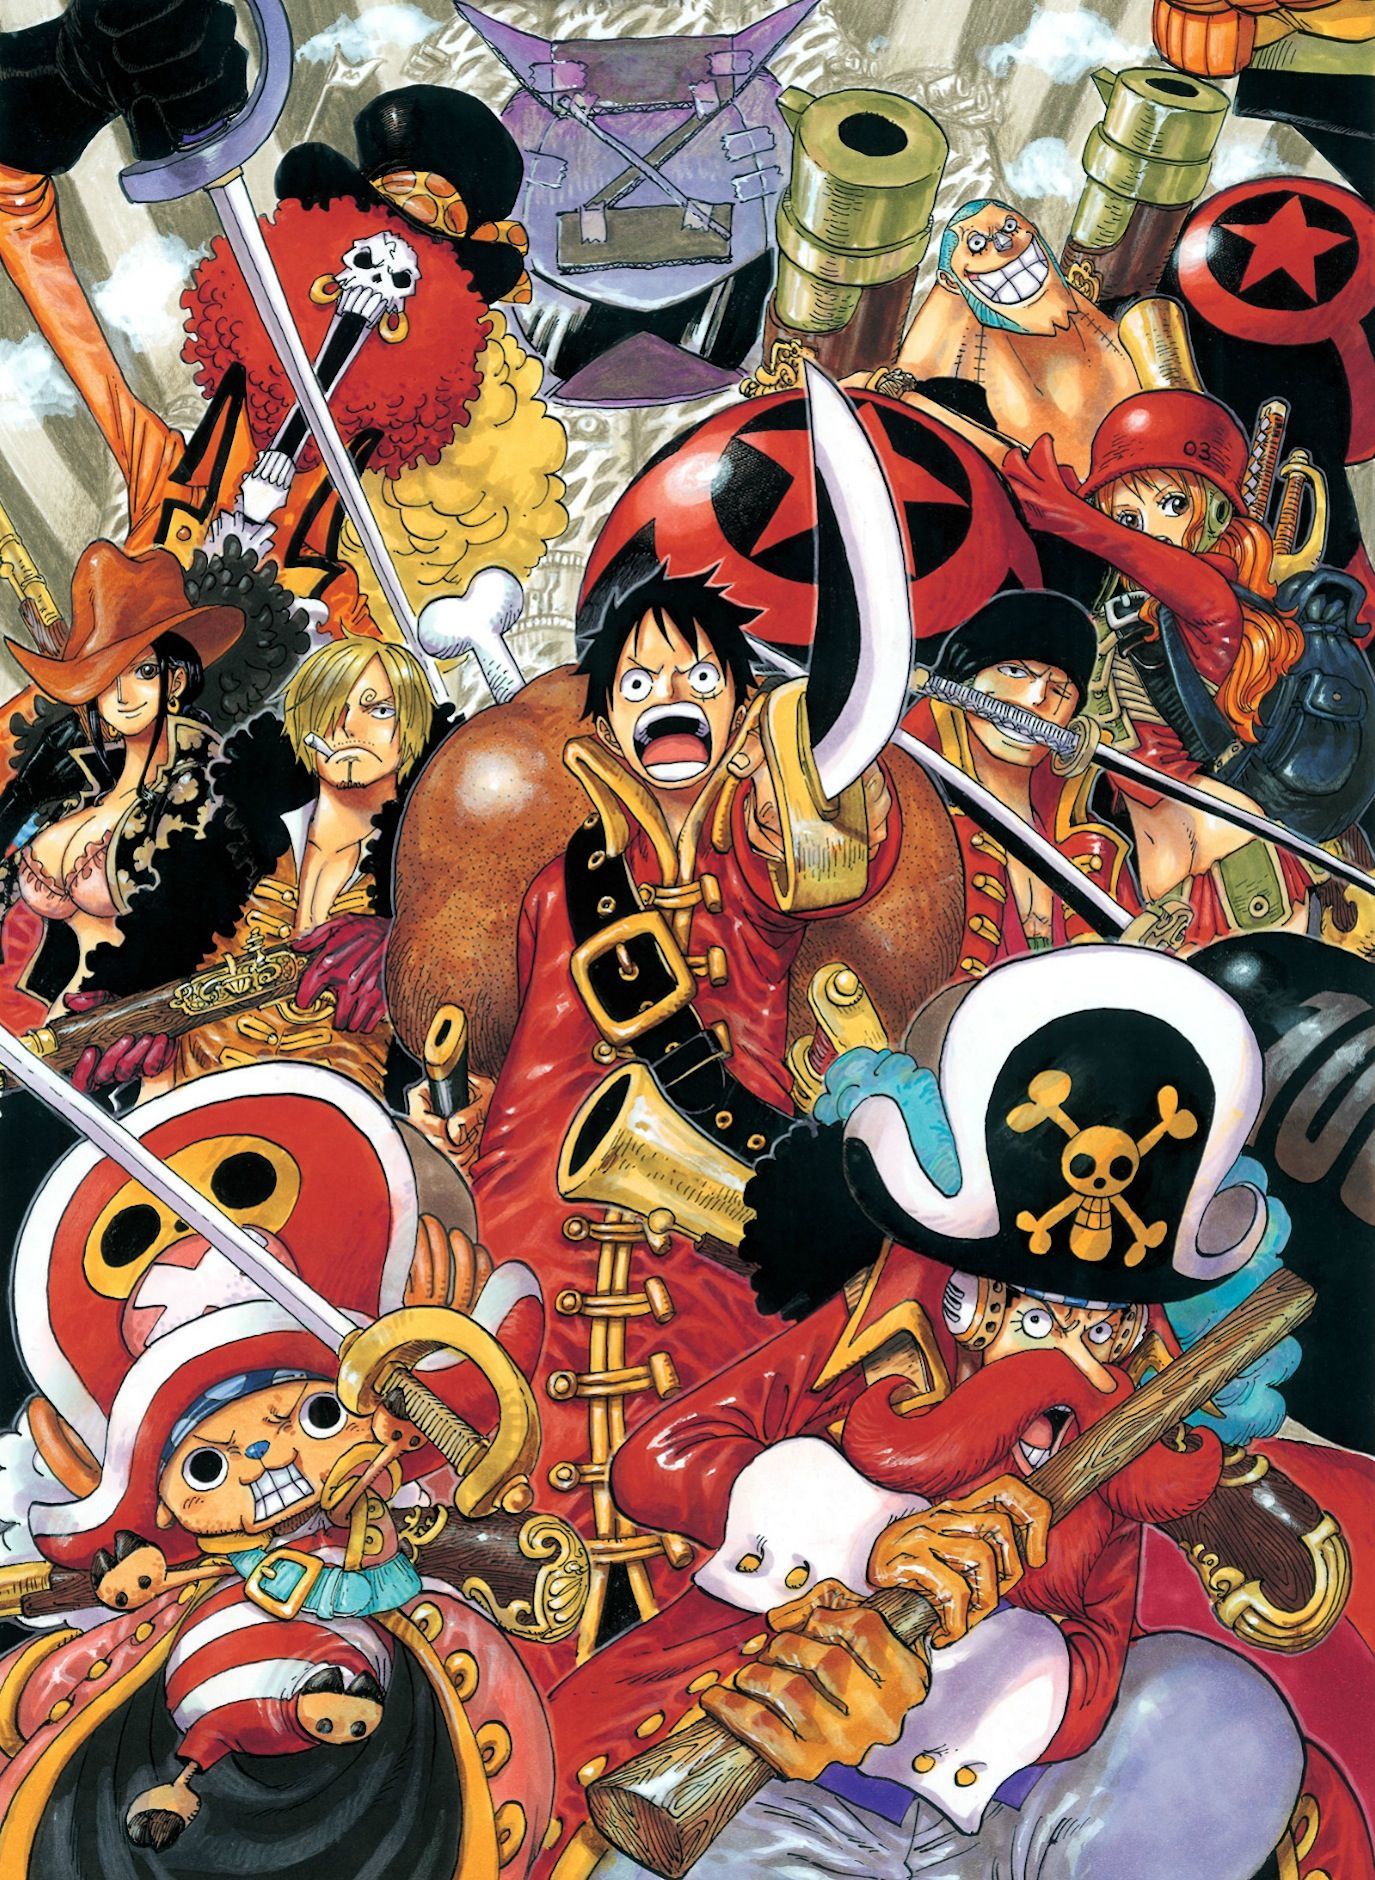 One Piece Flim Z Wallpapers - Wallpaper Cave